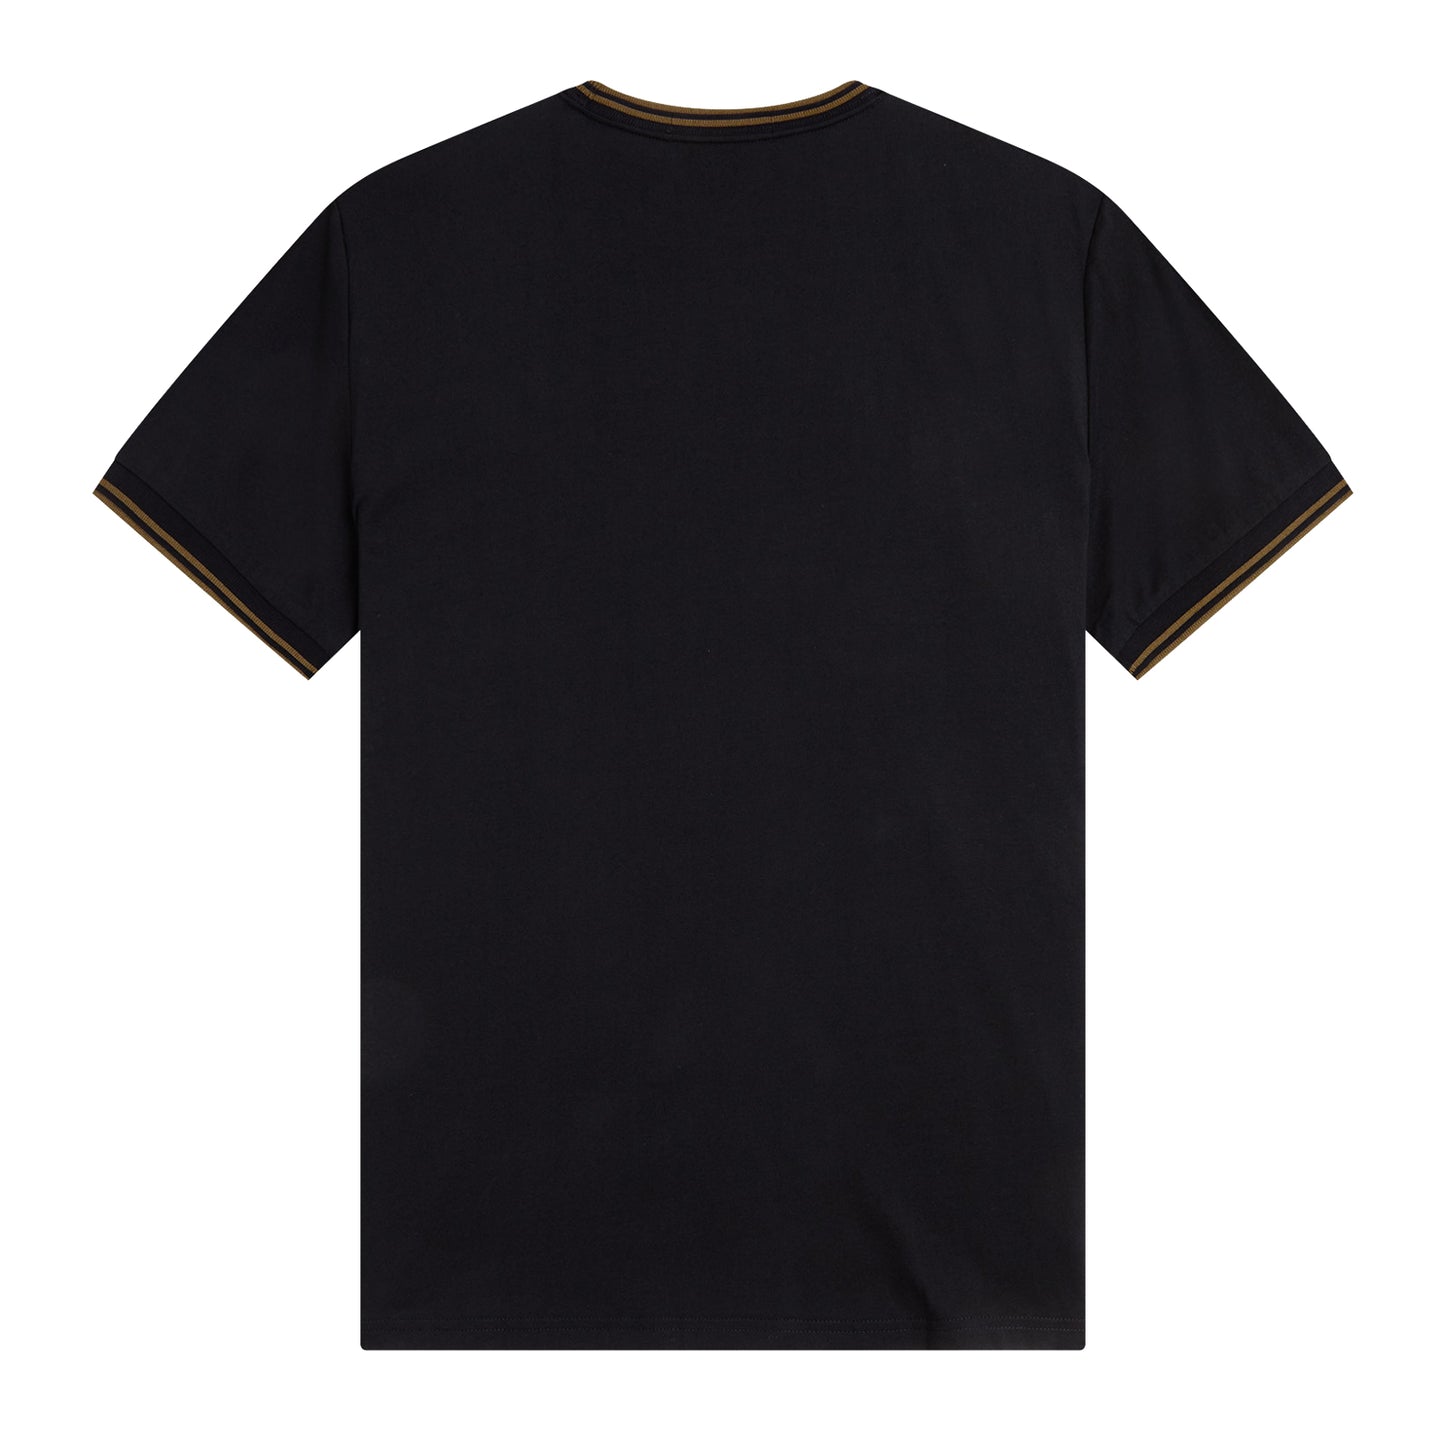 Fred Perry Twin Tipped T-Shirt Black/Shaded Stone/Shaded Stone. Foto da parte de trás.